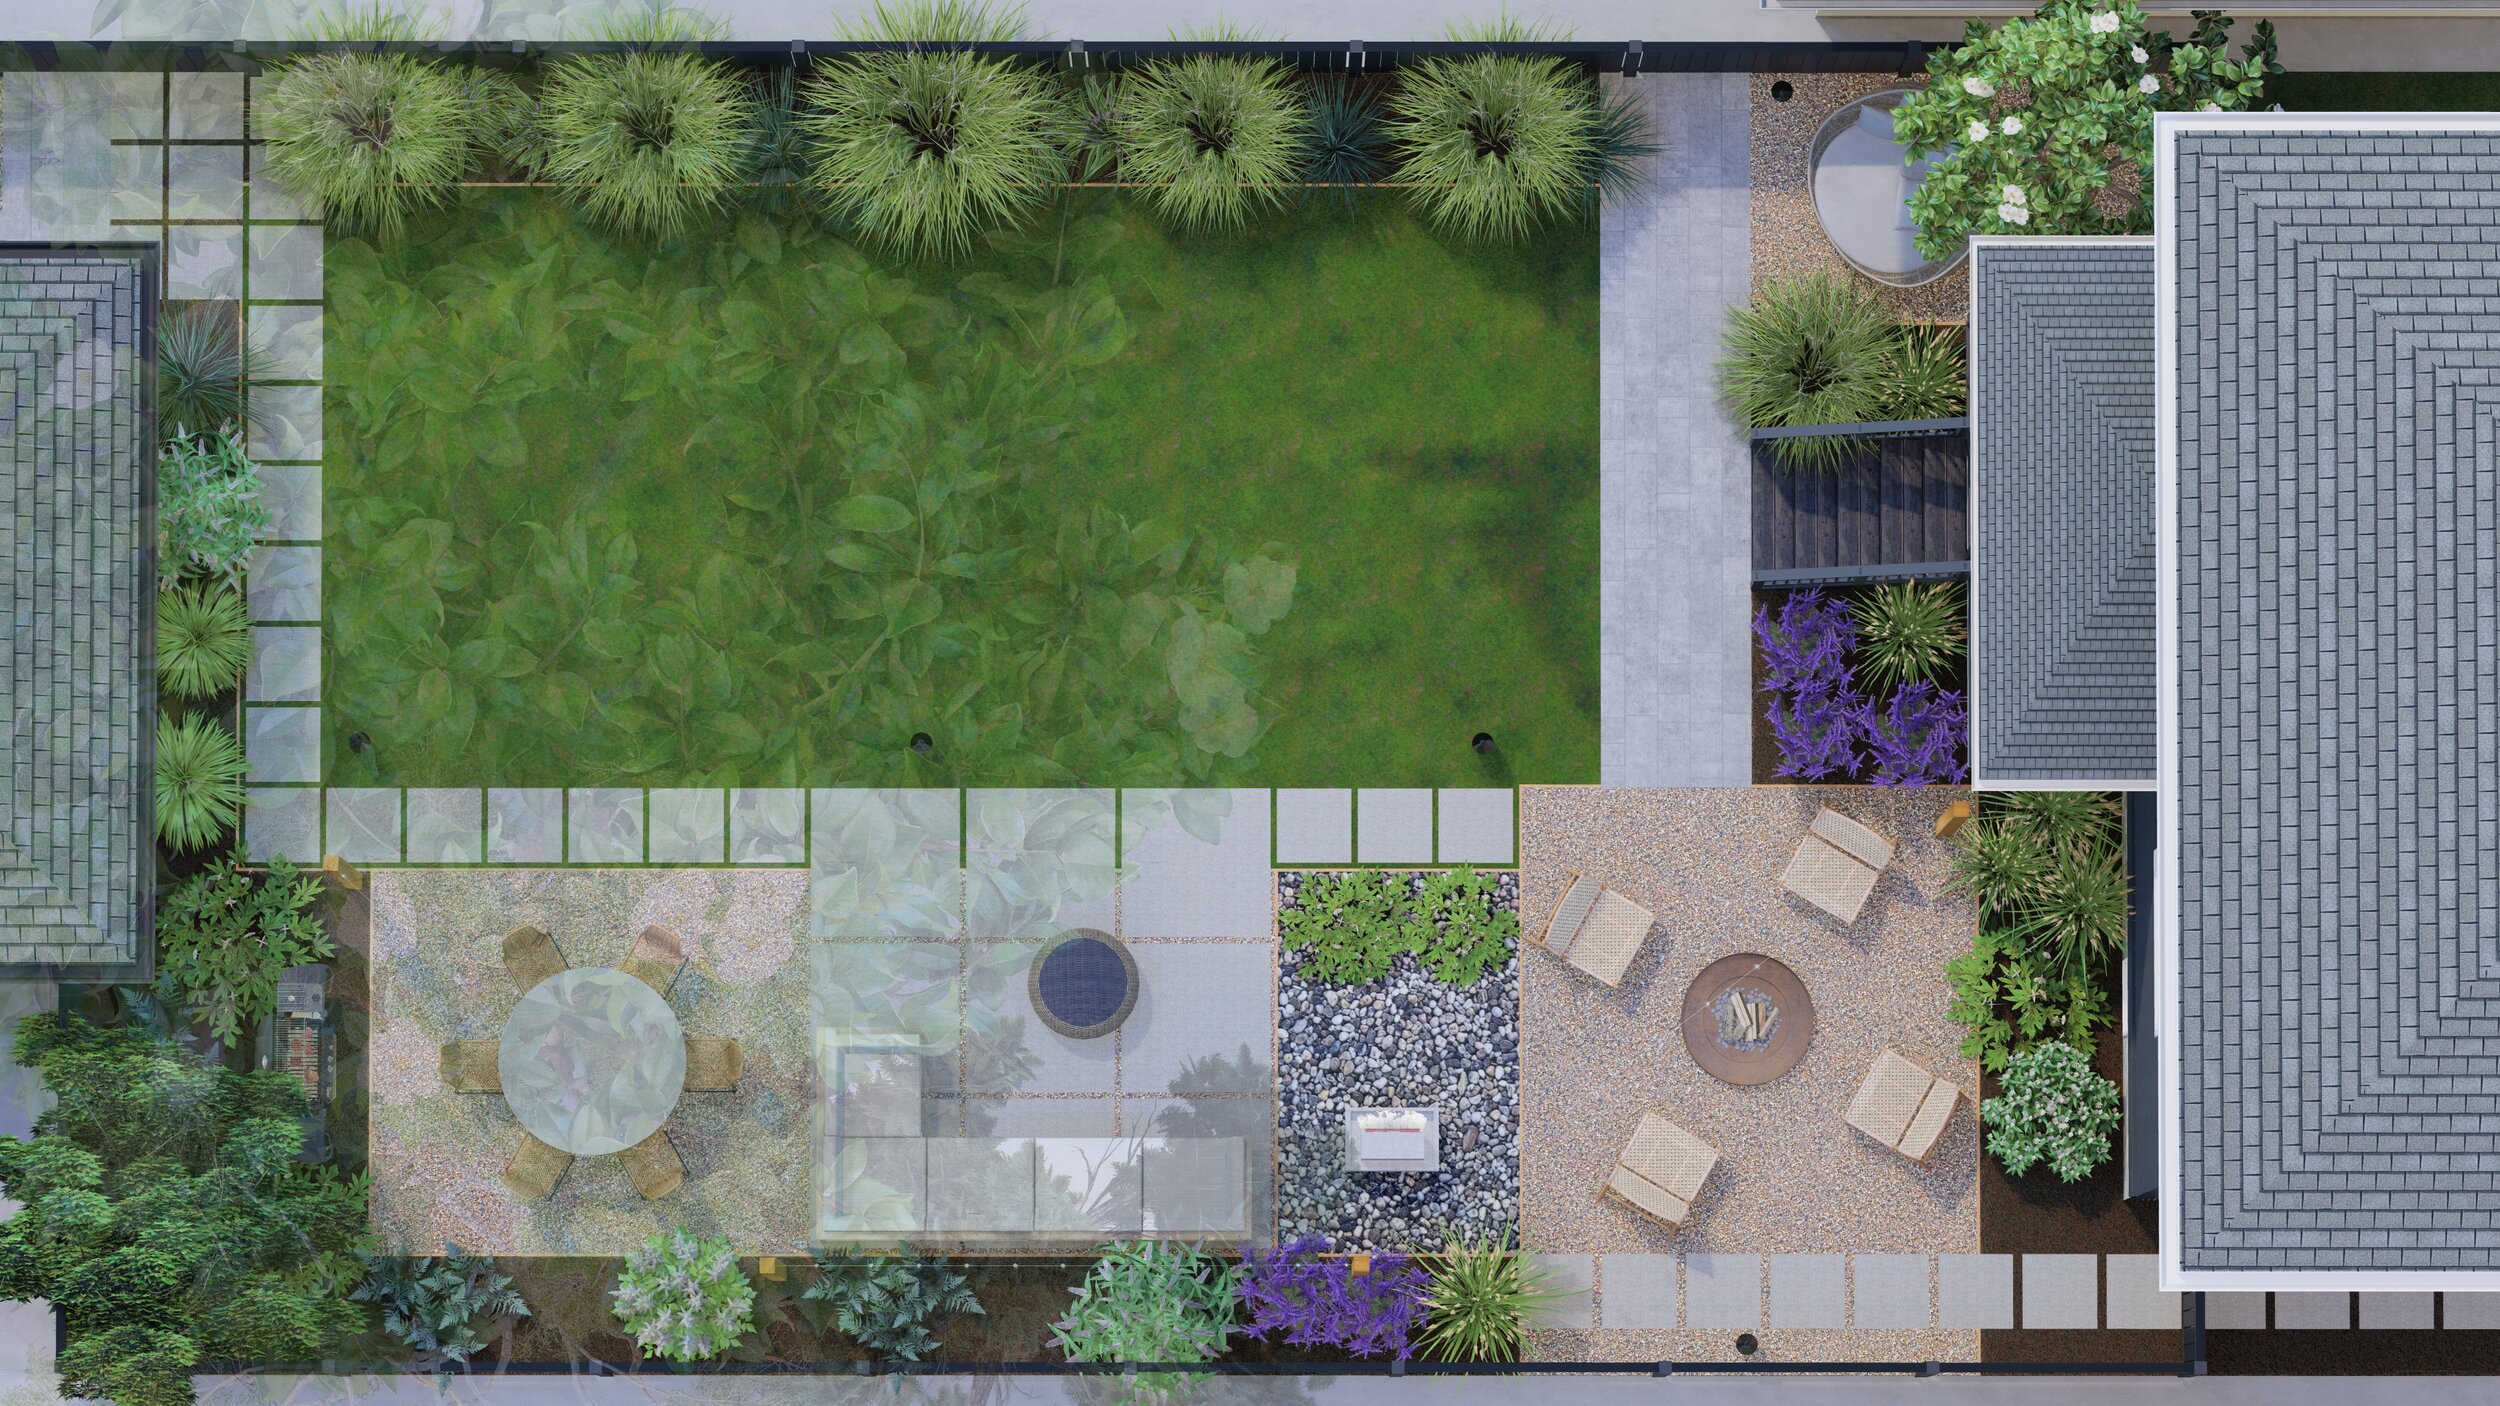 Overhead view of backyard with outdoor fire pit area, lounge area, dining area and grassy area with paver walkways